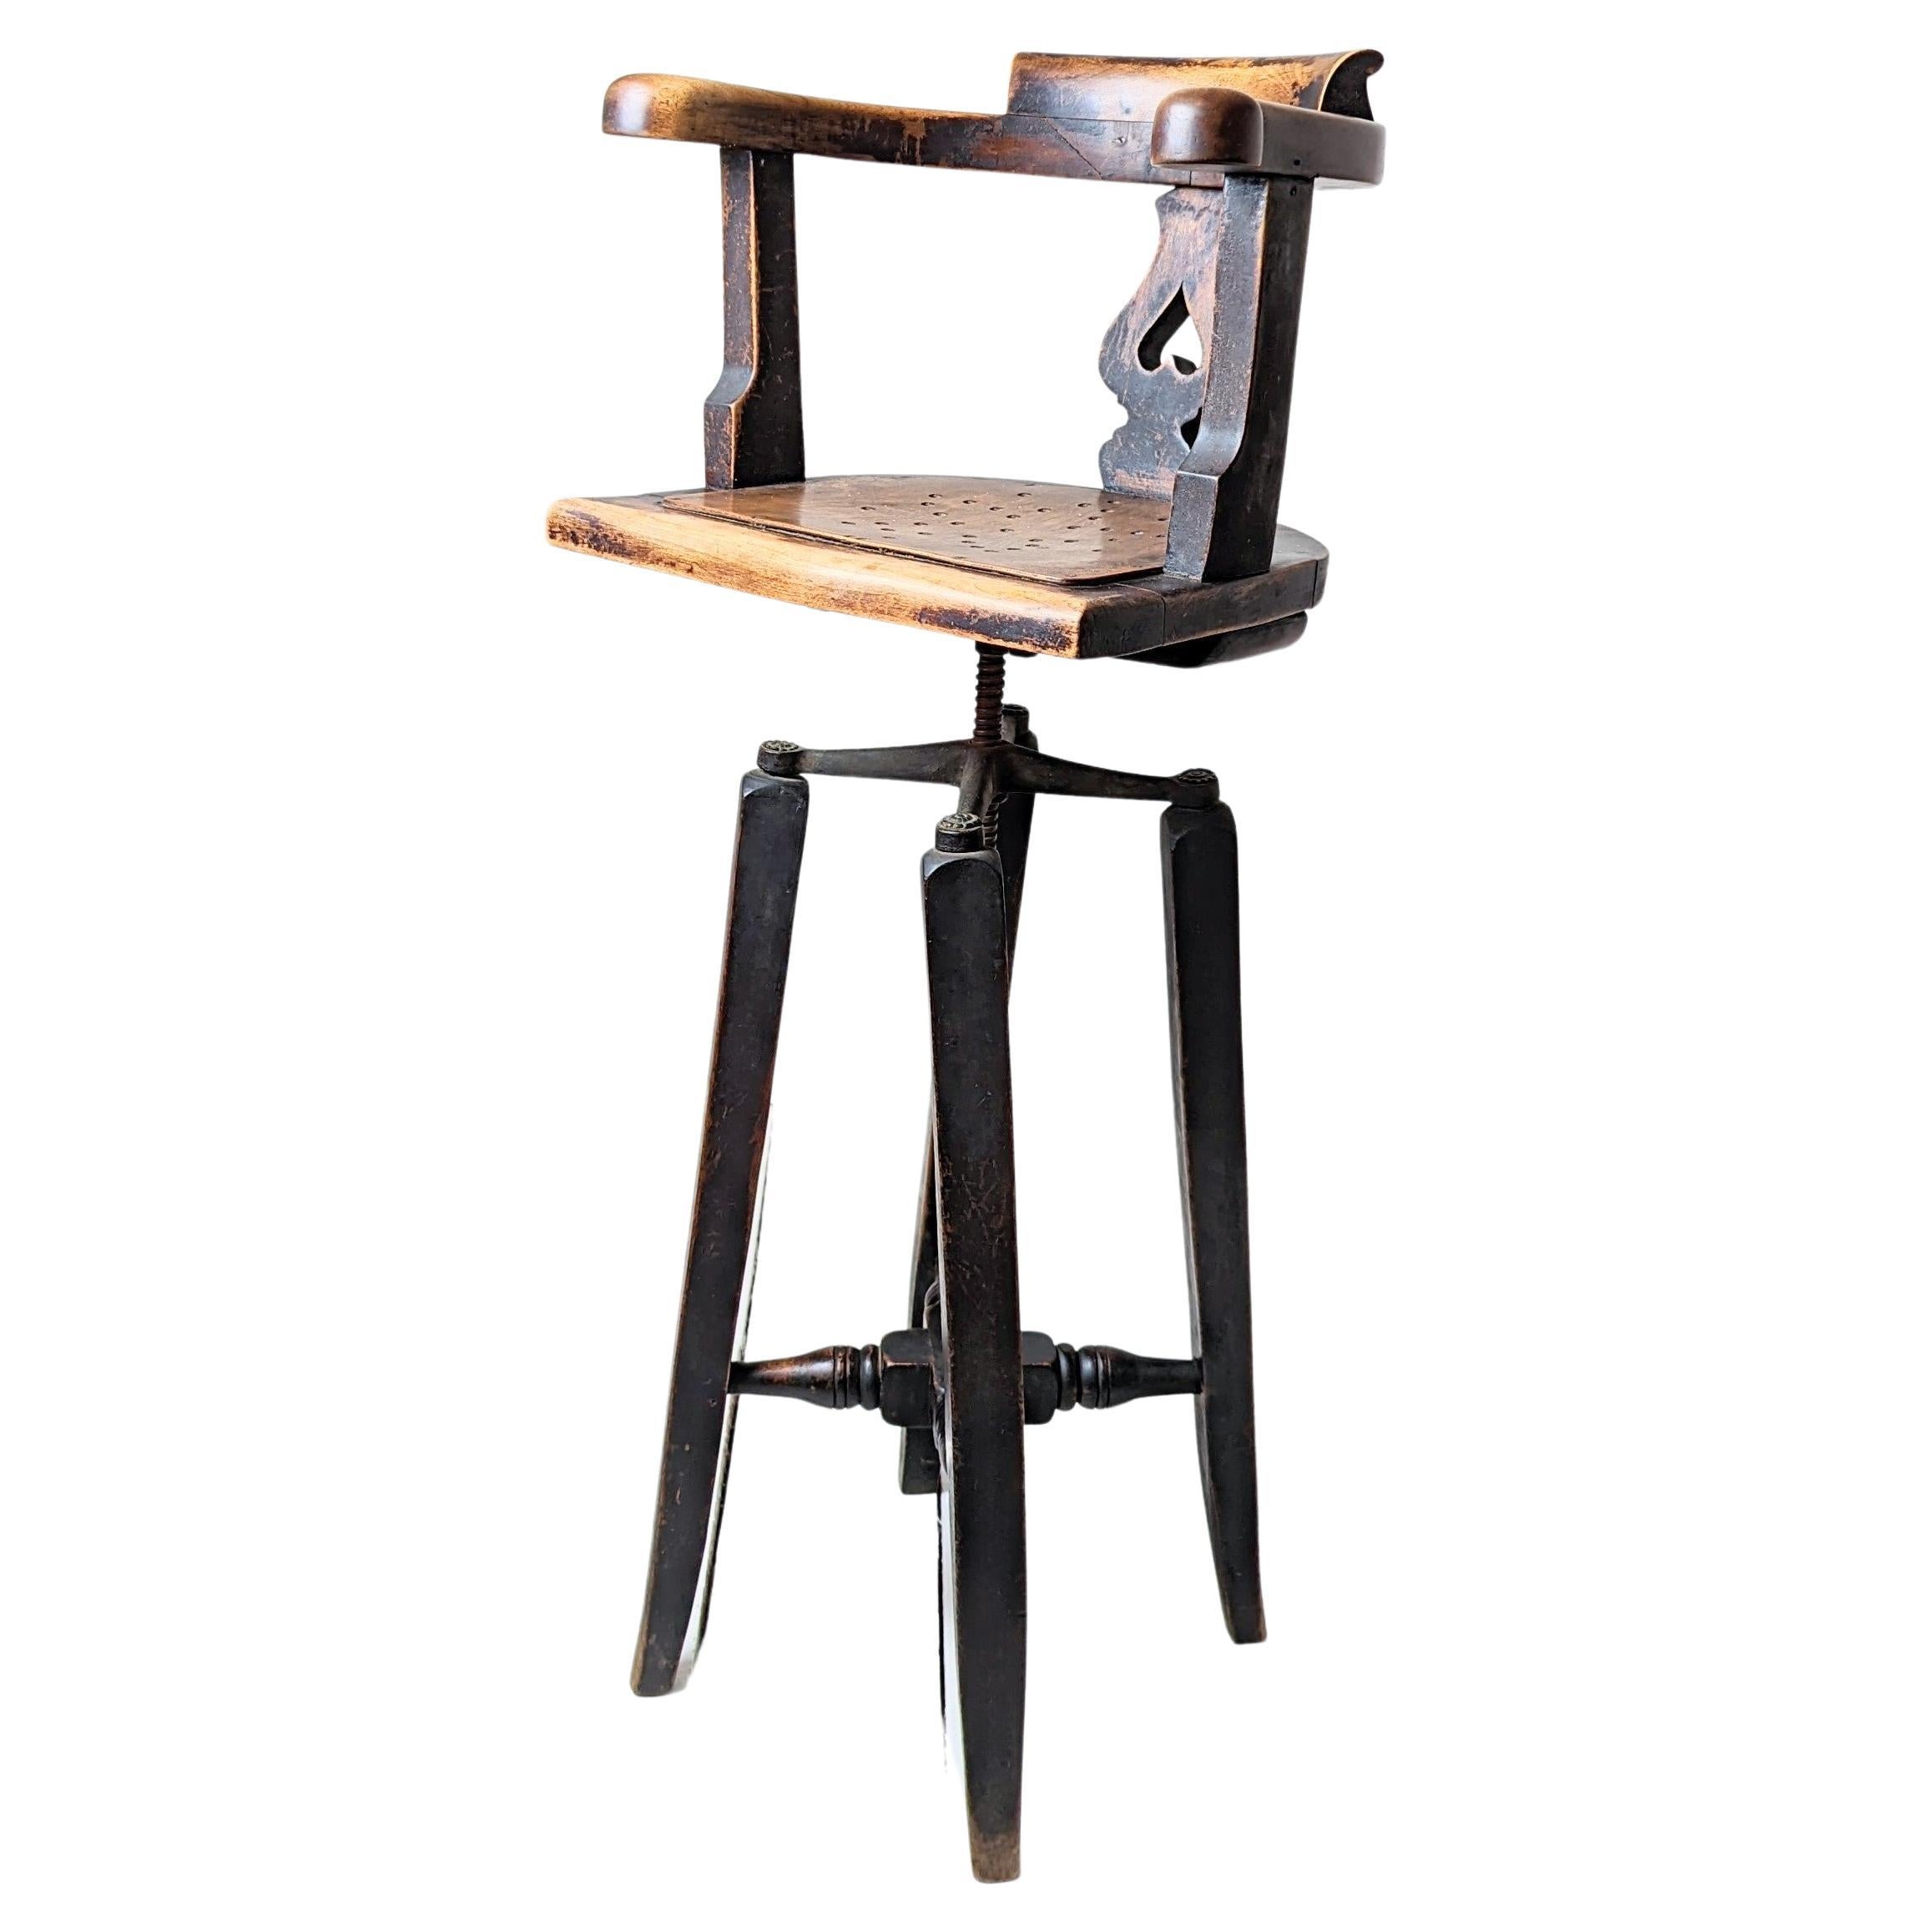  19th Century English Vernacular Childs Barbers Chair